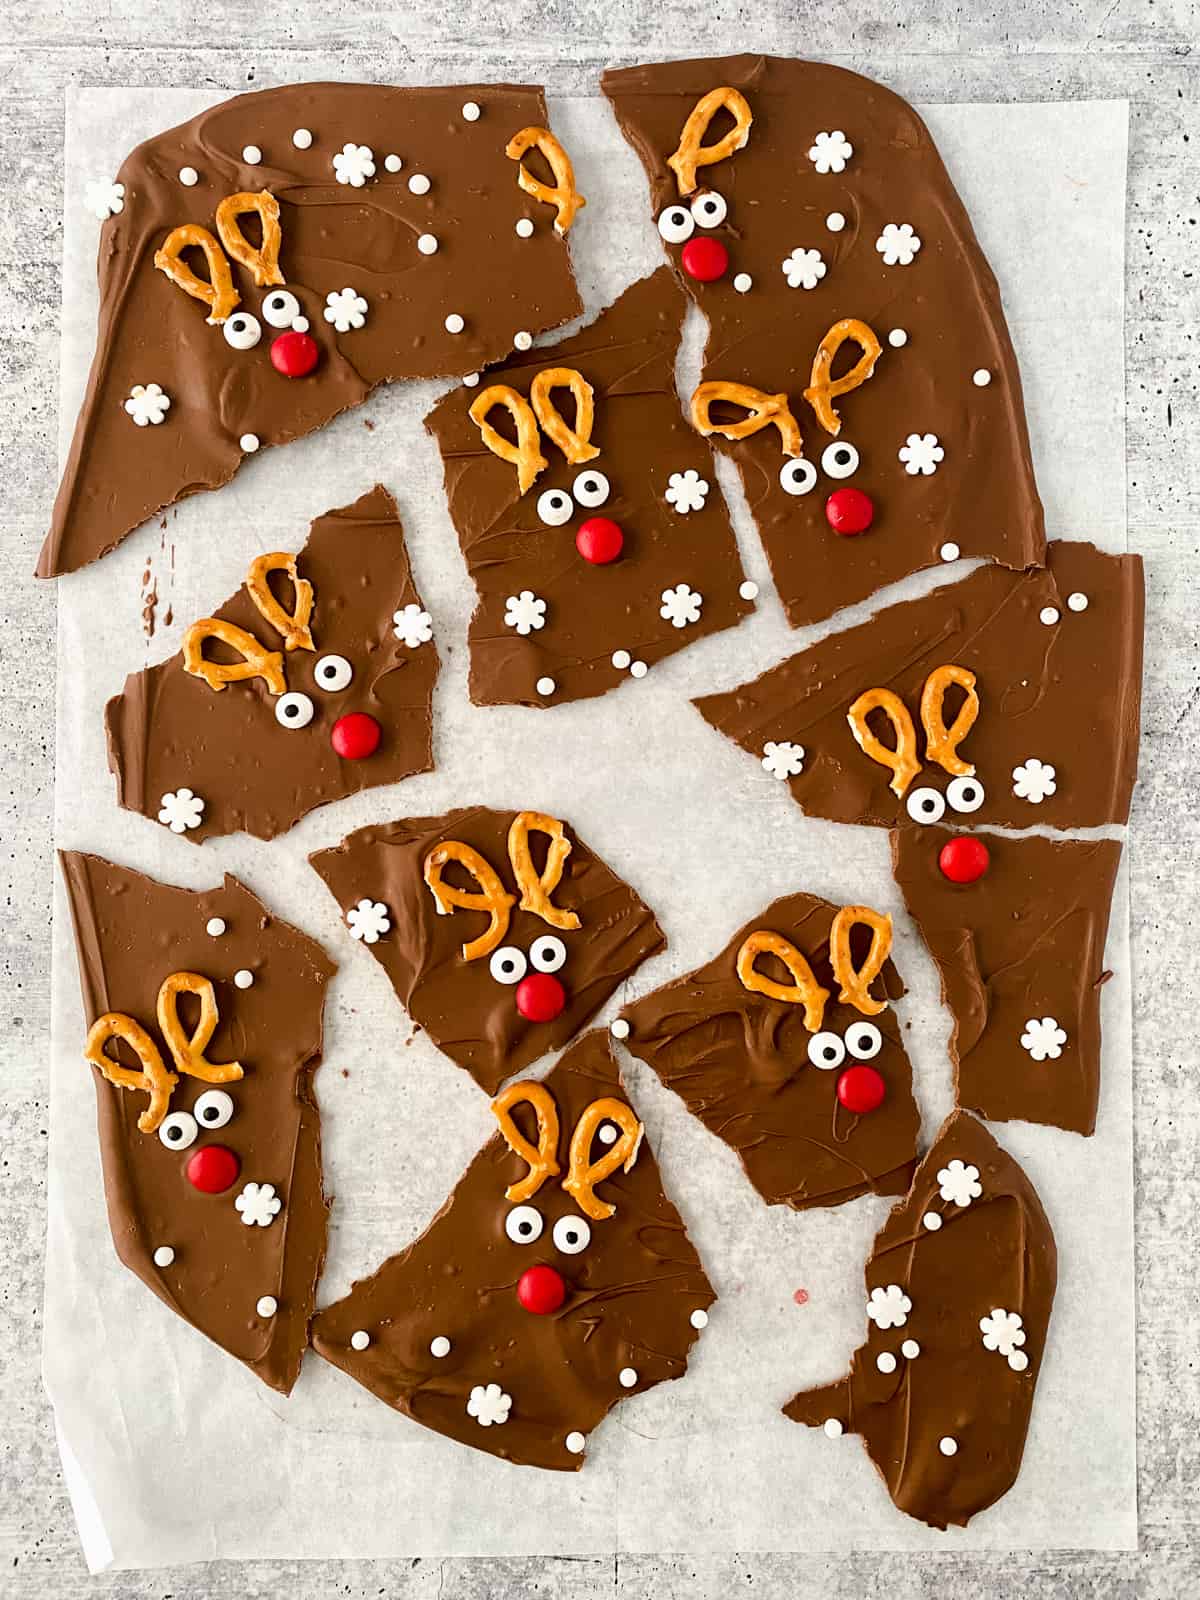 Reindeer Chocolate Christmas Bark broken into pieces on parchment paper